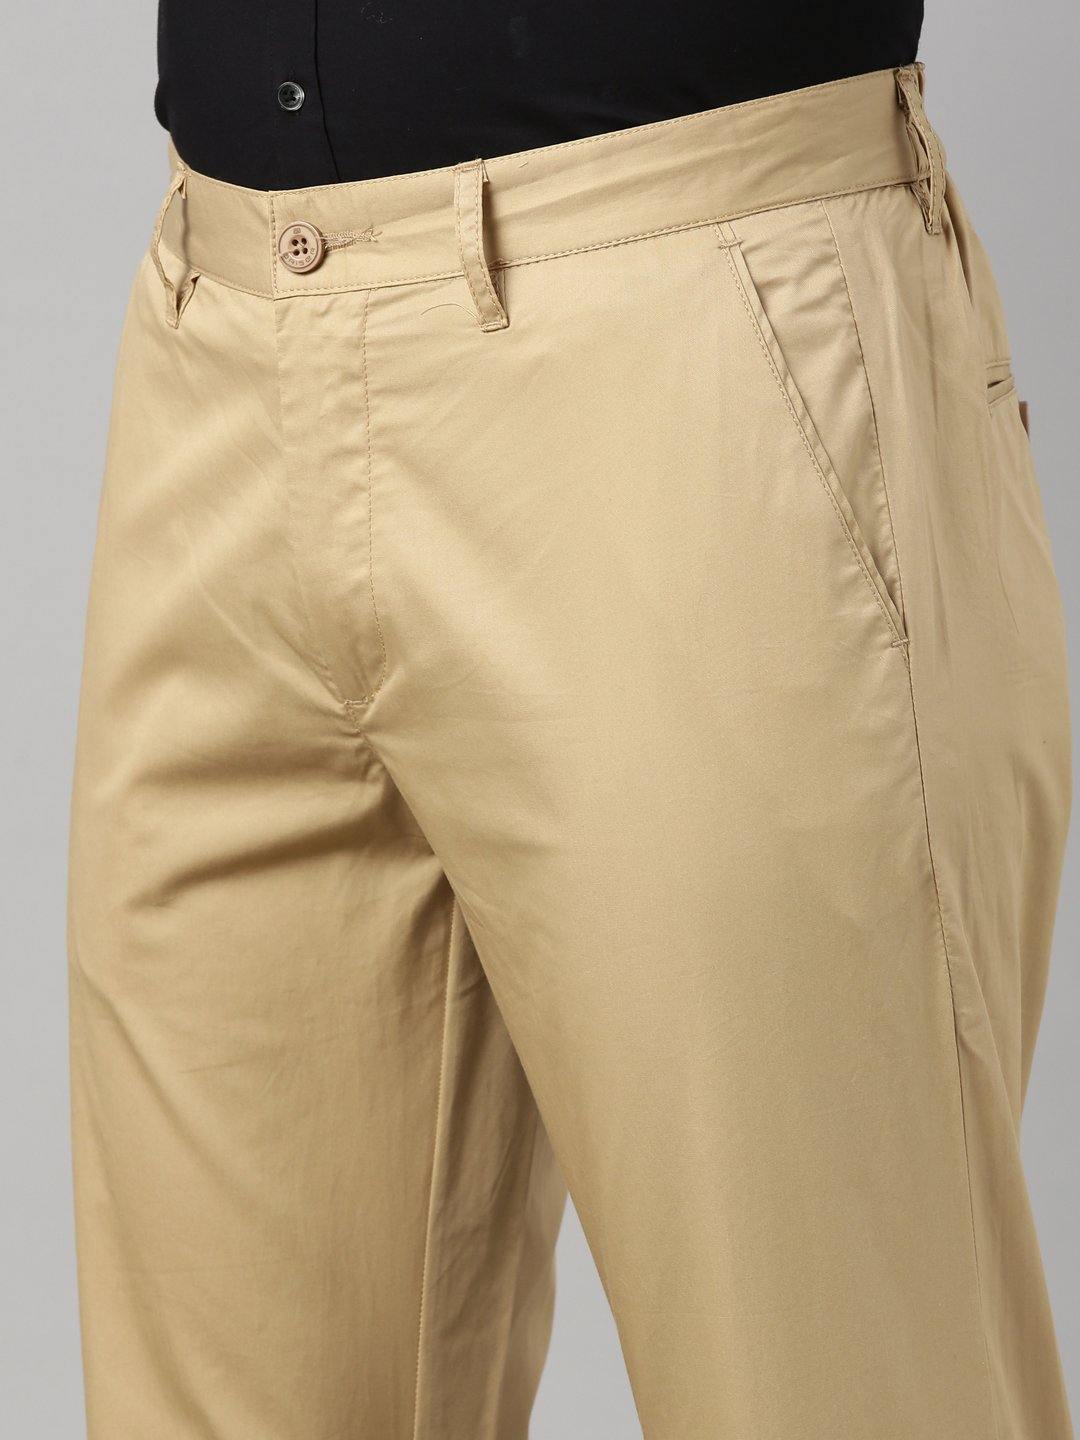 Cream Light Weight And Casual Wear Slim Fit Plain Cotton Trouser For Mens  at Best Price in New Delhi  Jyoti Traders